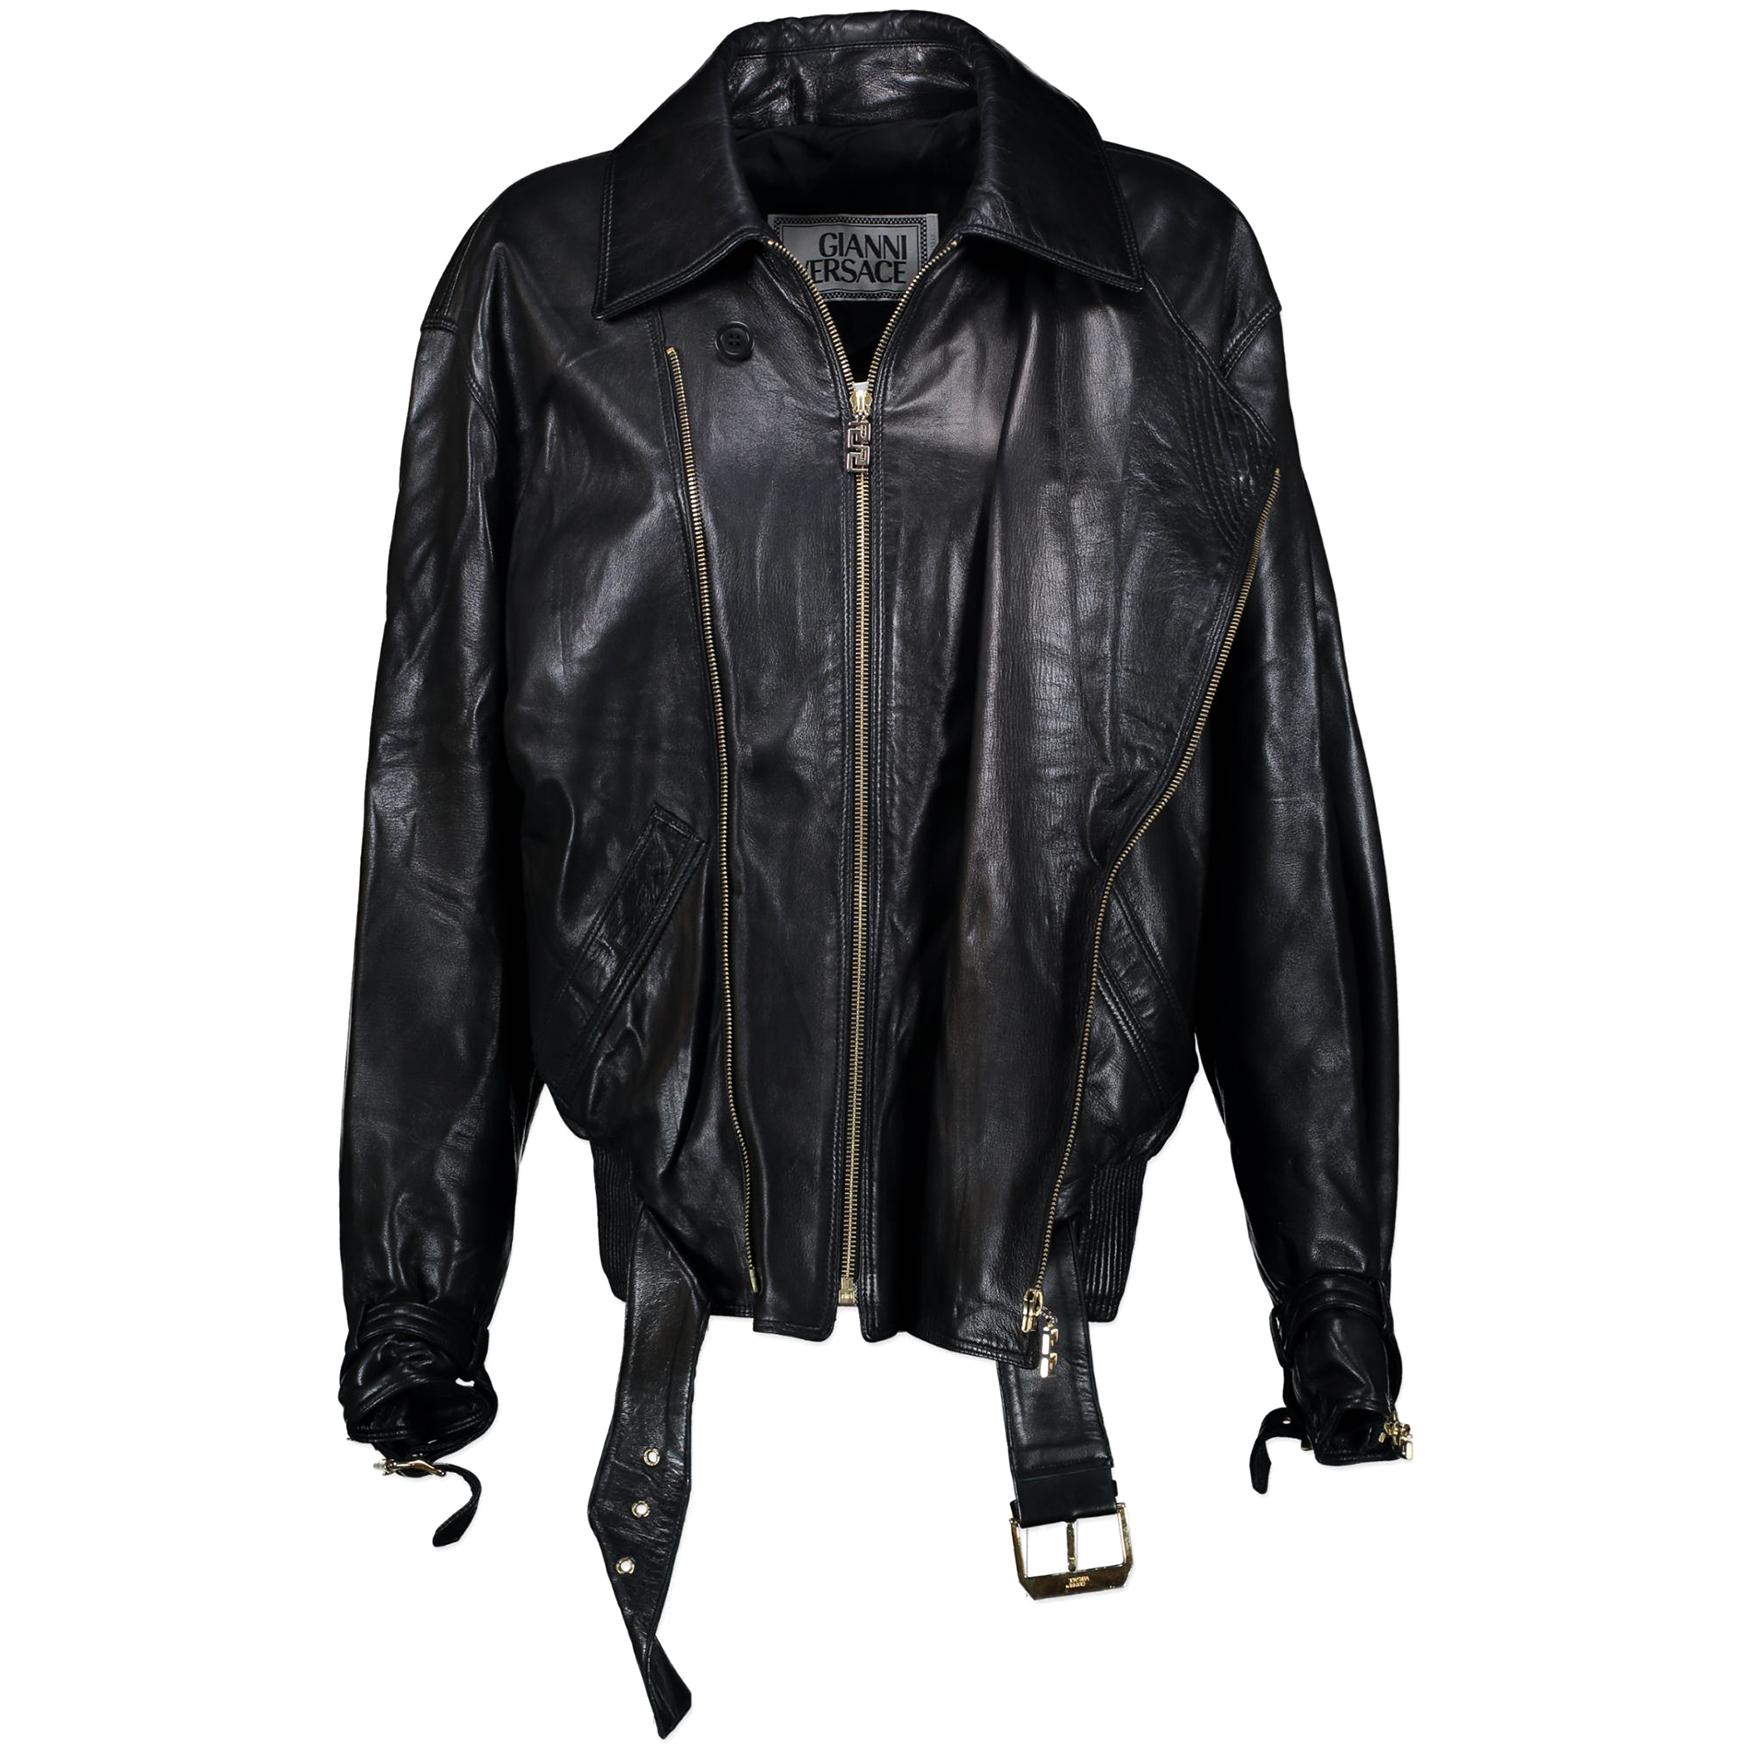 This unisex Gianni Versace Black Leather Motorcycle Jacket will fit for a size S (oversized) or Medium. The soft leather features gold hardware details and an elastic waist band. Zippers and decorative belt.